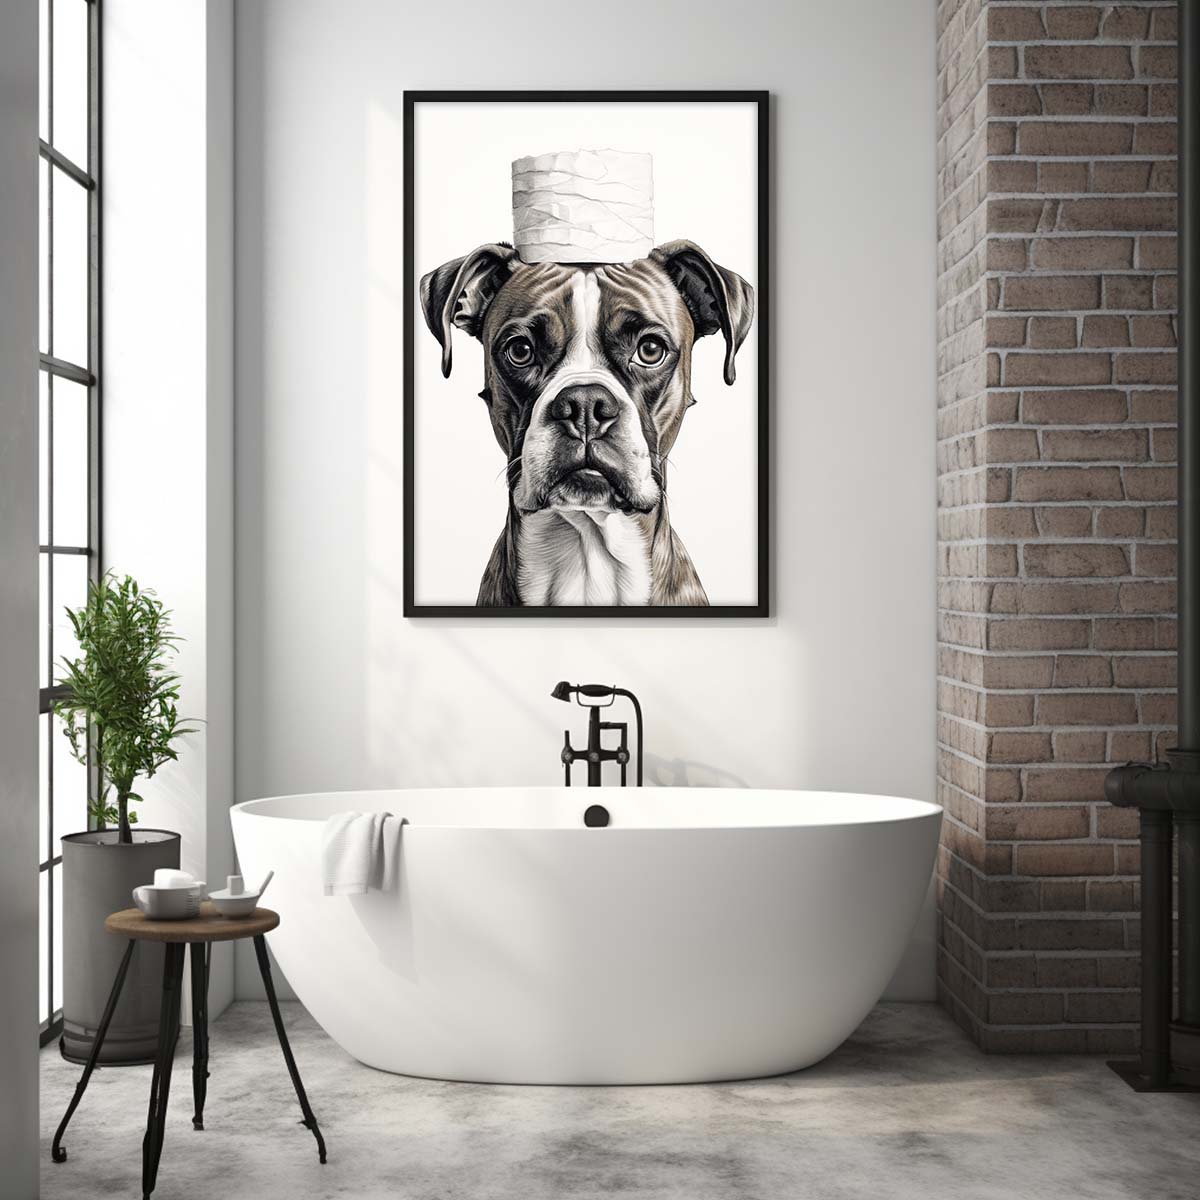 Boxer With Toilet Paper, Canvas Or Poster, Funny Dog Art, Bathroom Wall Decor, Home Decor, Bathroom Wall Art, Dog Wall Decor, Animal Decor, Pet Gift, Pet Illustration, Digital Download